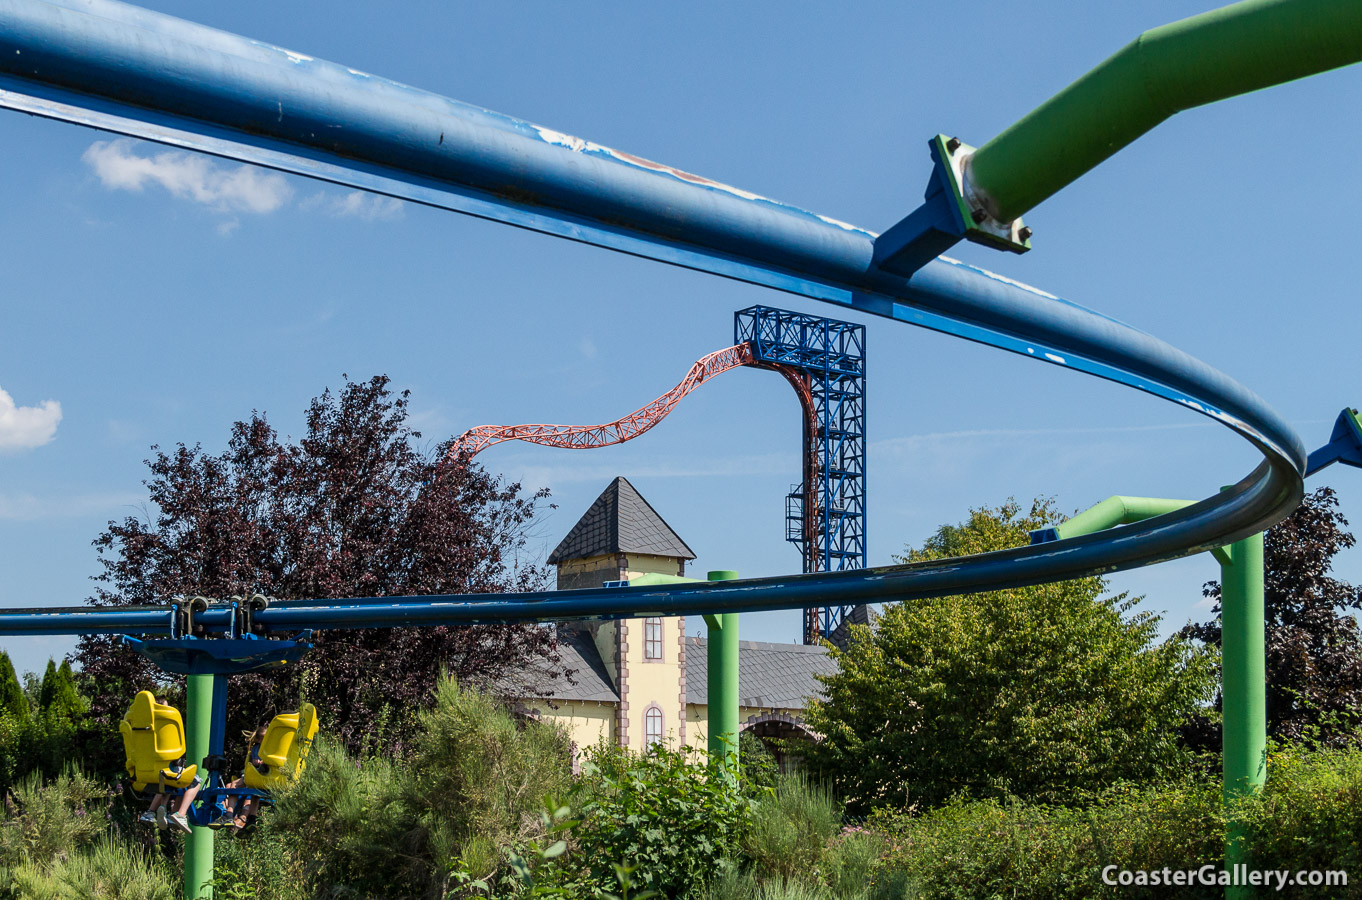 Details and history of the single-rail roller coasters built by Caripro and other manufacturers.